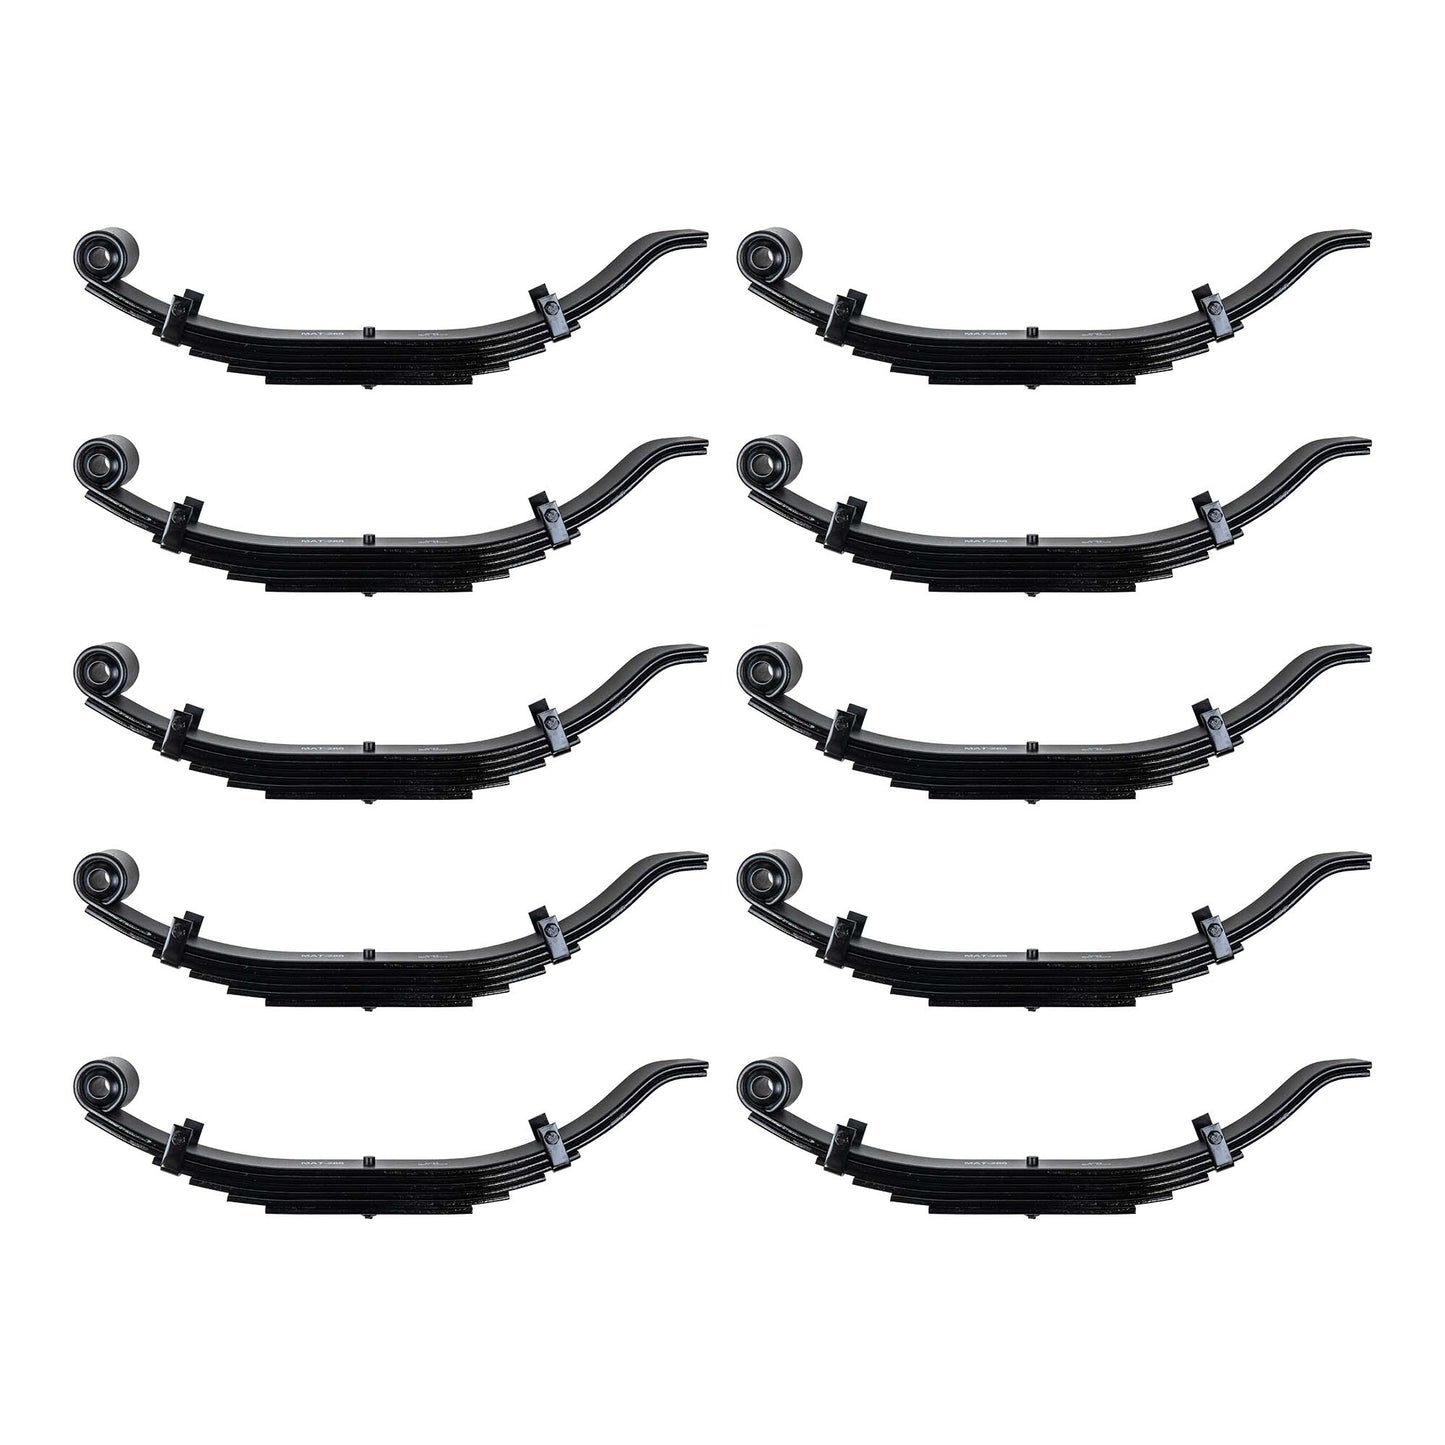 10 pack - 6 Leaf 30" x 3" Wide Trailer Heavy Duty Slipper Spring for 12000 lb Axles